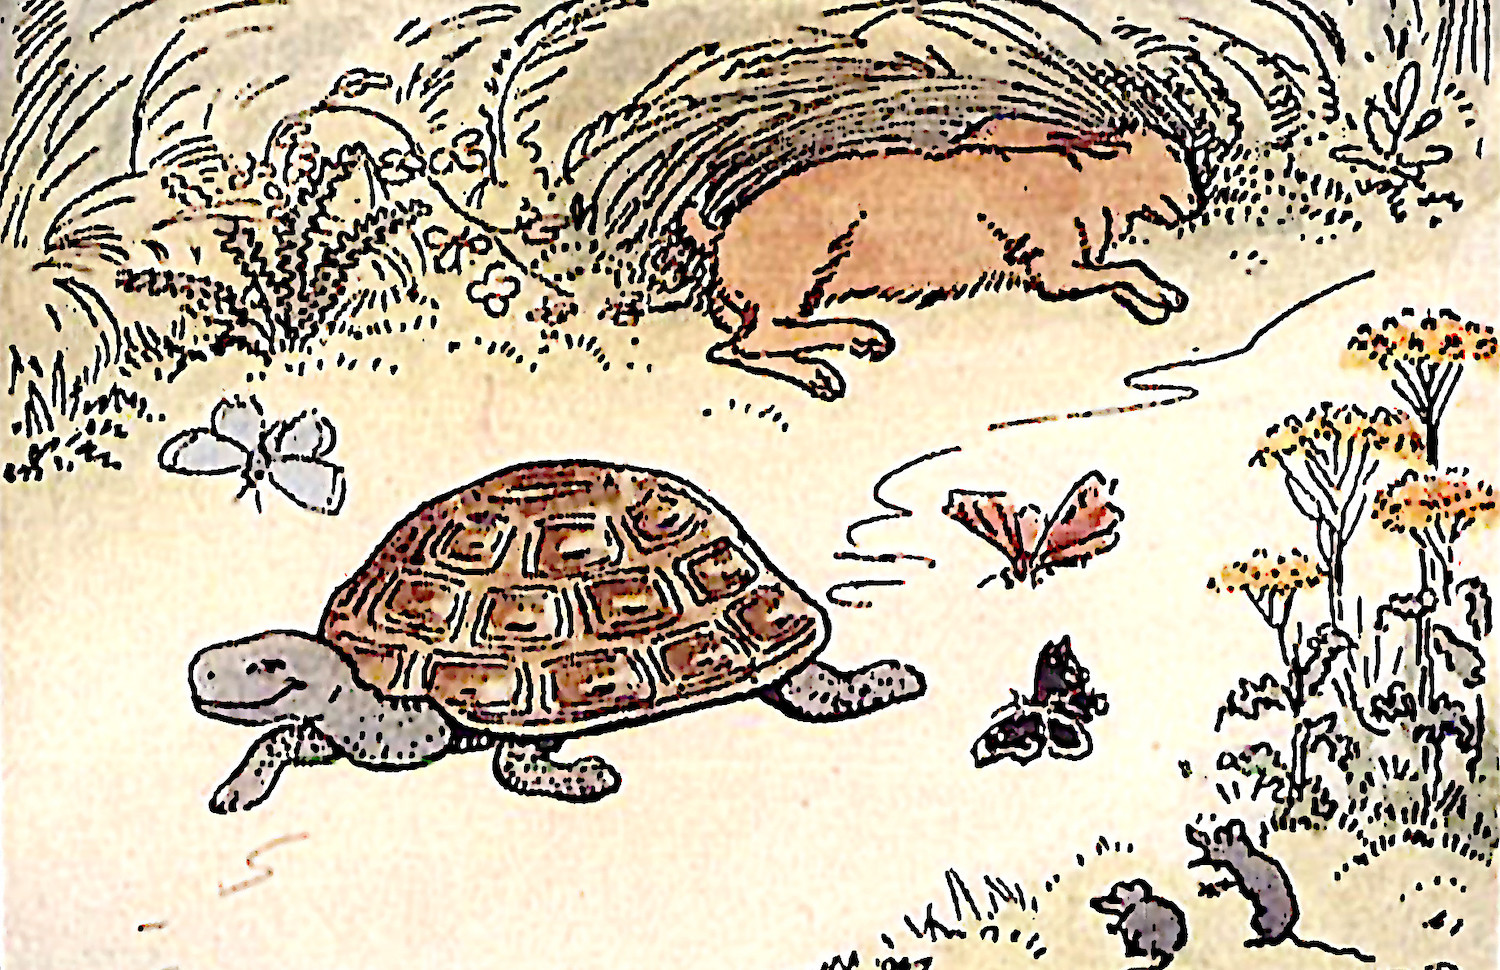 How the Turtle Got Its Shell, With Apologies to Aesop